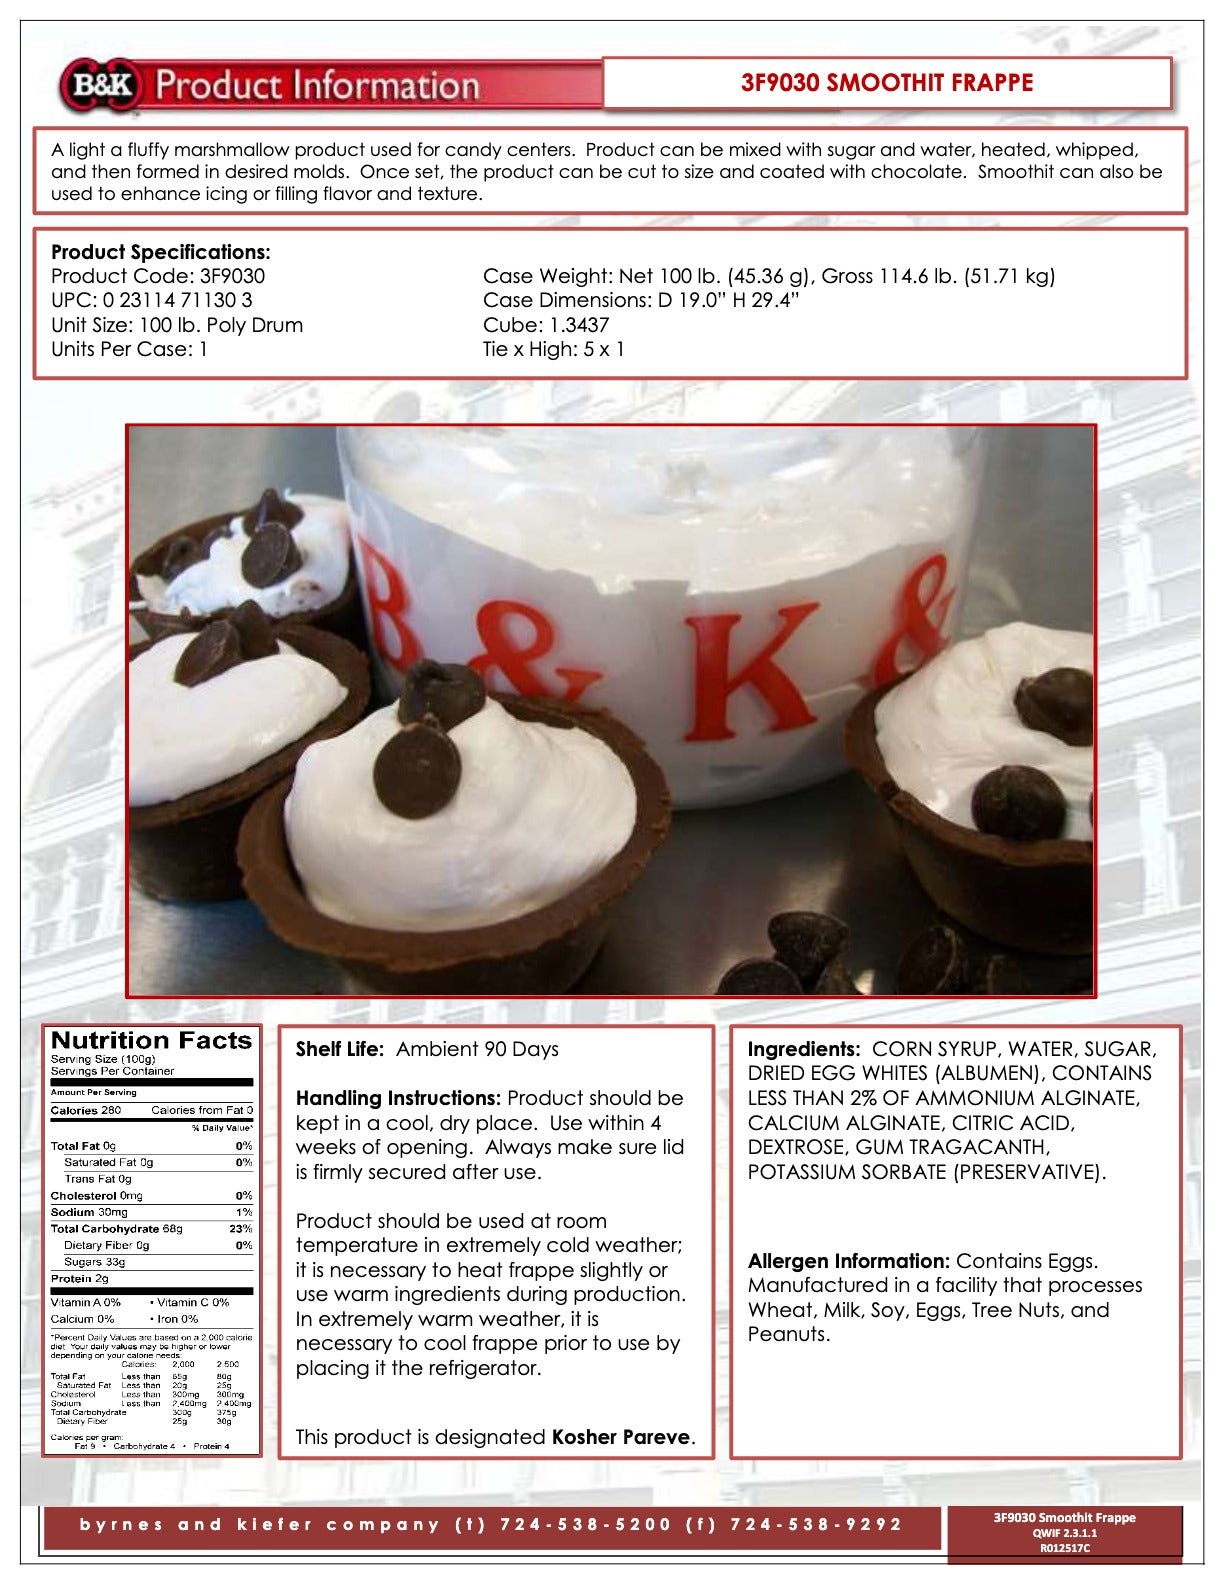 Smoothit Frappe Nutritional Info by B&K at Stover & Company 